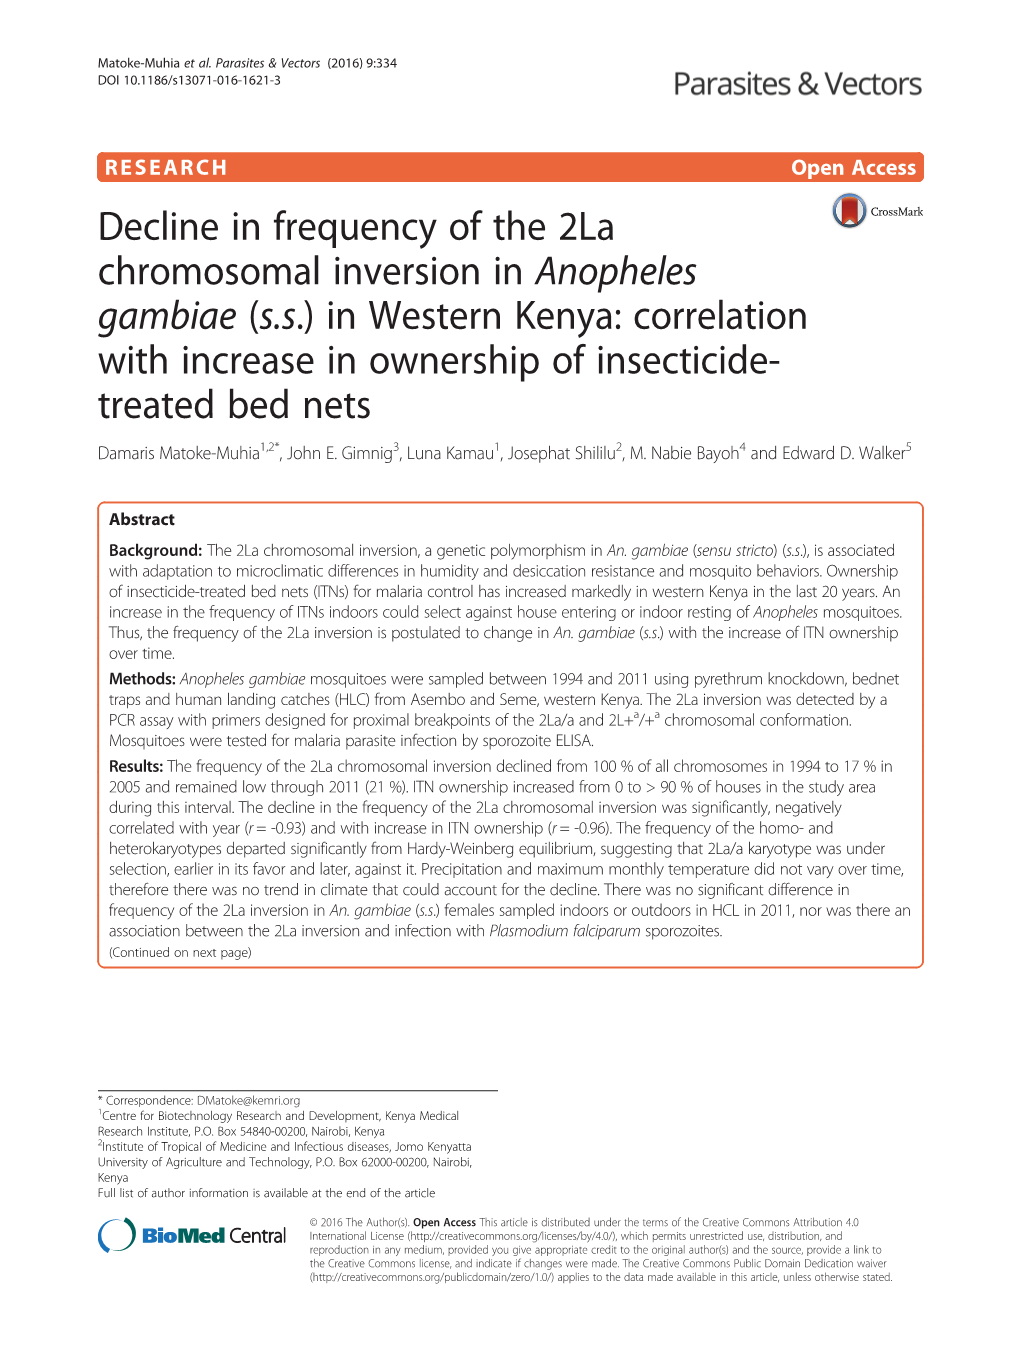 Anopheles Gambiae (S.S.) in Western Kenya: Correlation with Increase in Ownership of Insecticide- Treated Bed Nets Damaris Matoke-Muhia1,2*, John E